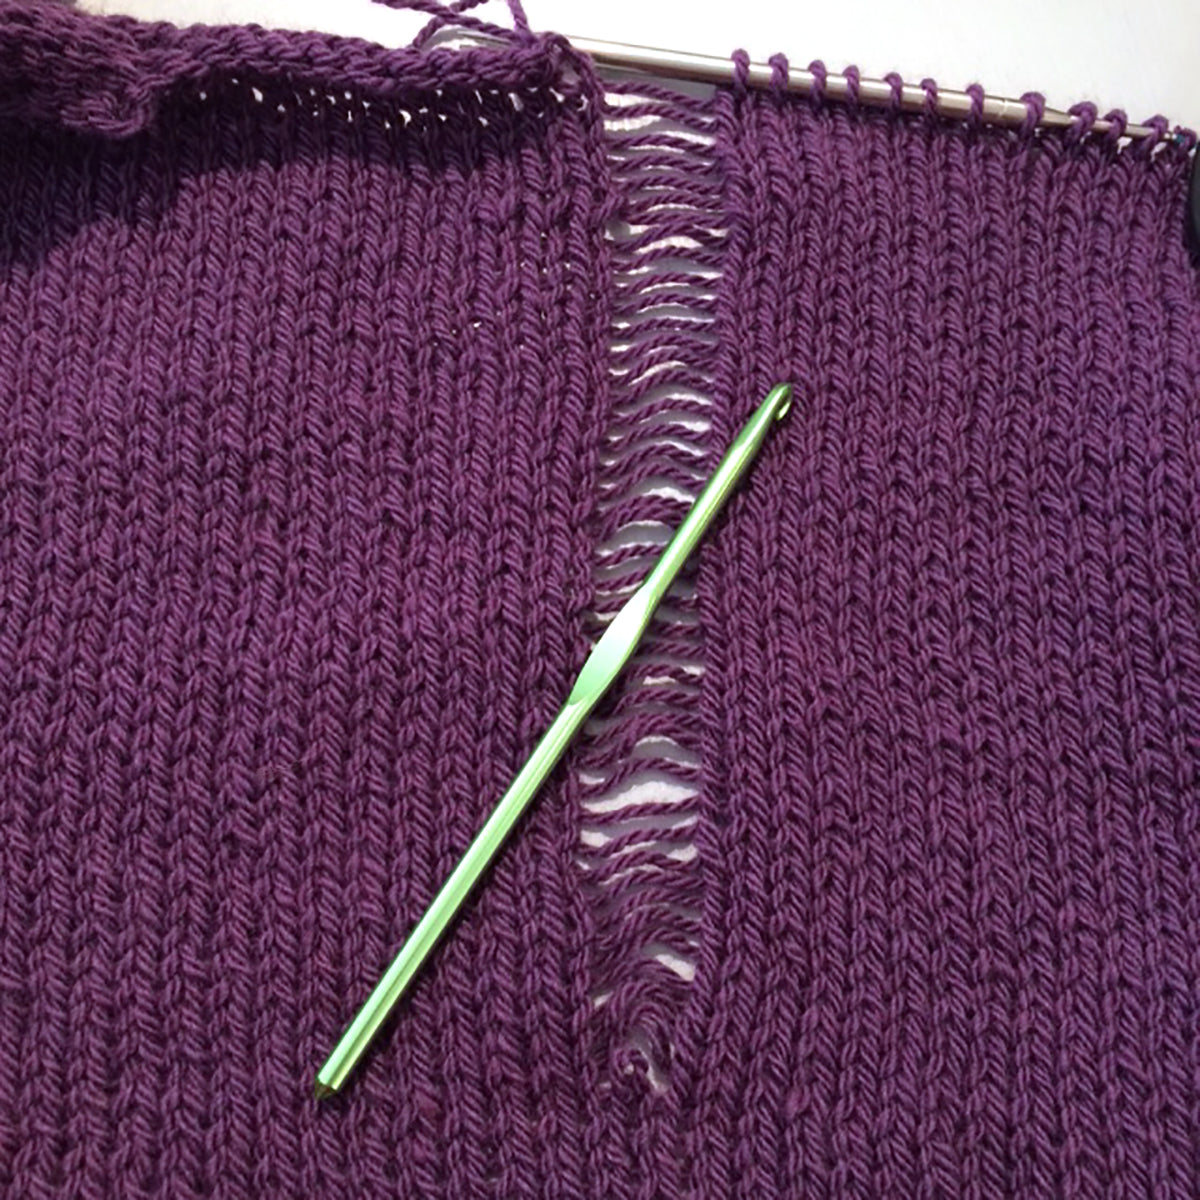 Green crochet hook lying atop purple knitting where one stitch has dropped down. 